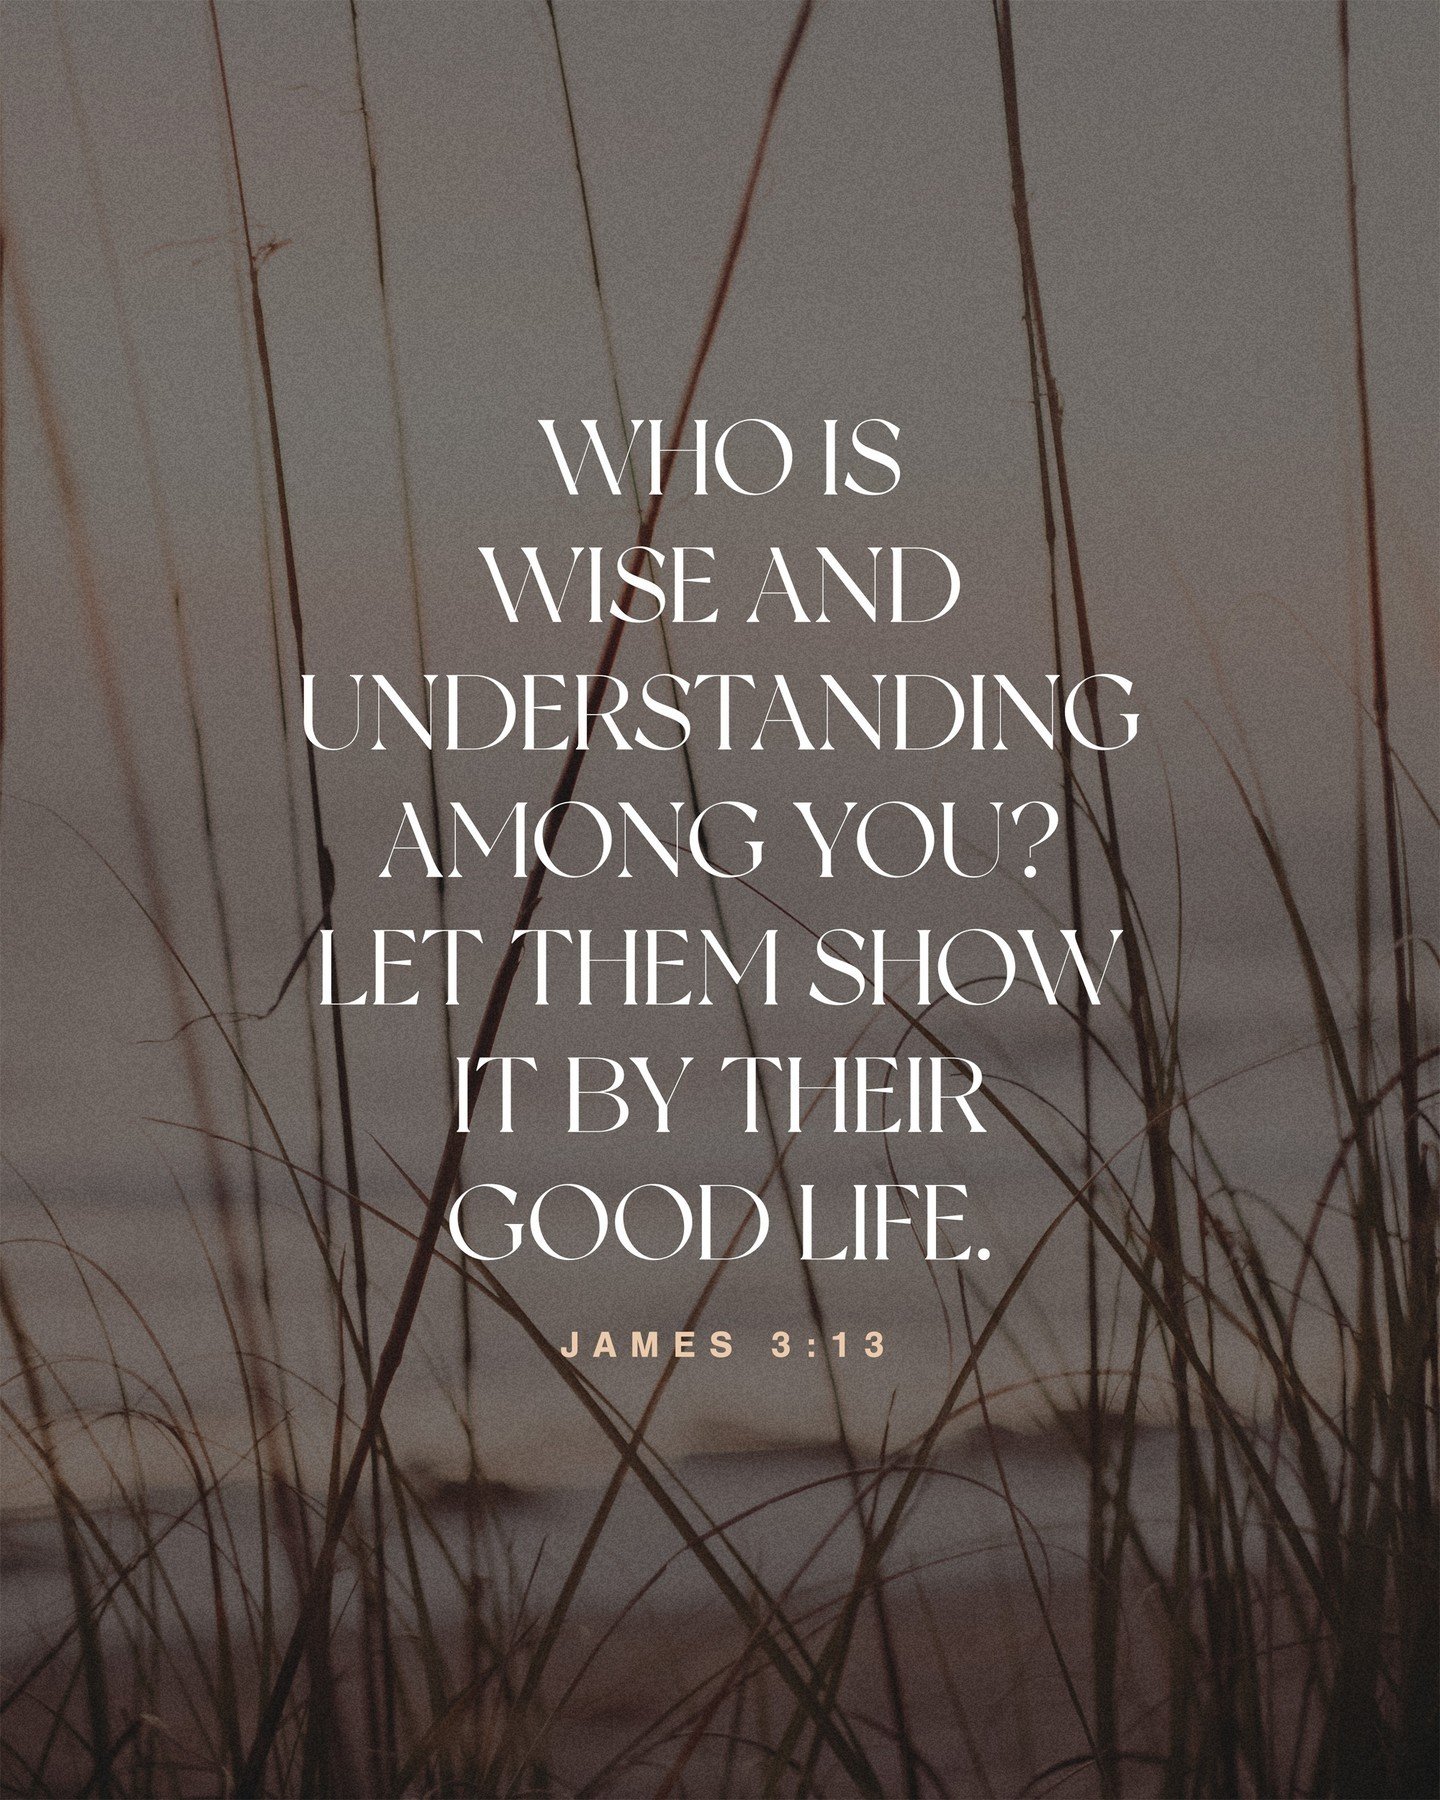 &quot;Who is wise and understanding among you? Let them show it by their good life.&quot; - James 3:13
.
.
.
#church #god #morning #jesus #christ #love #christian #worship #bible #james